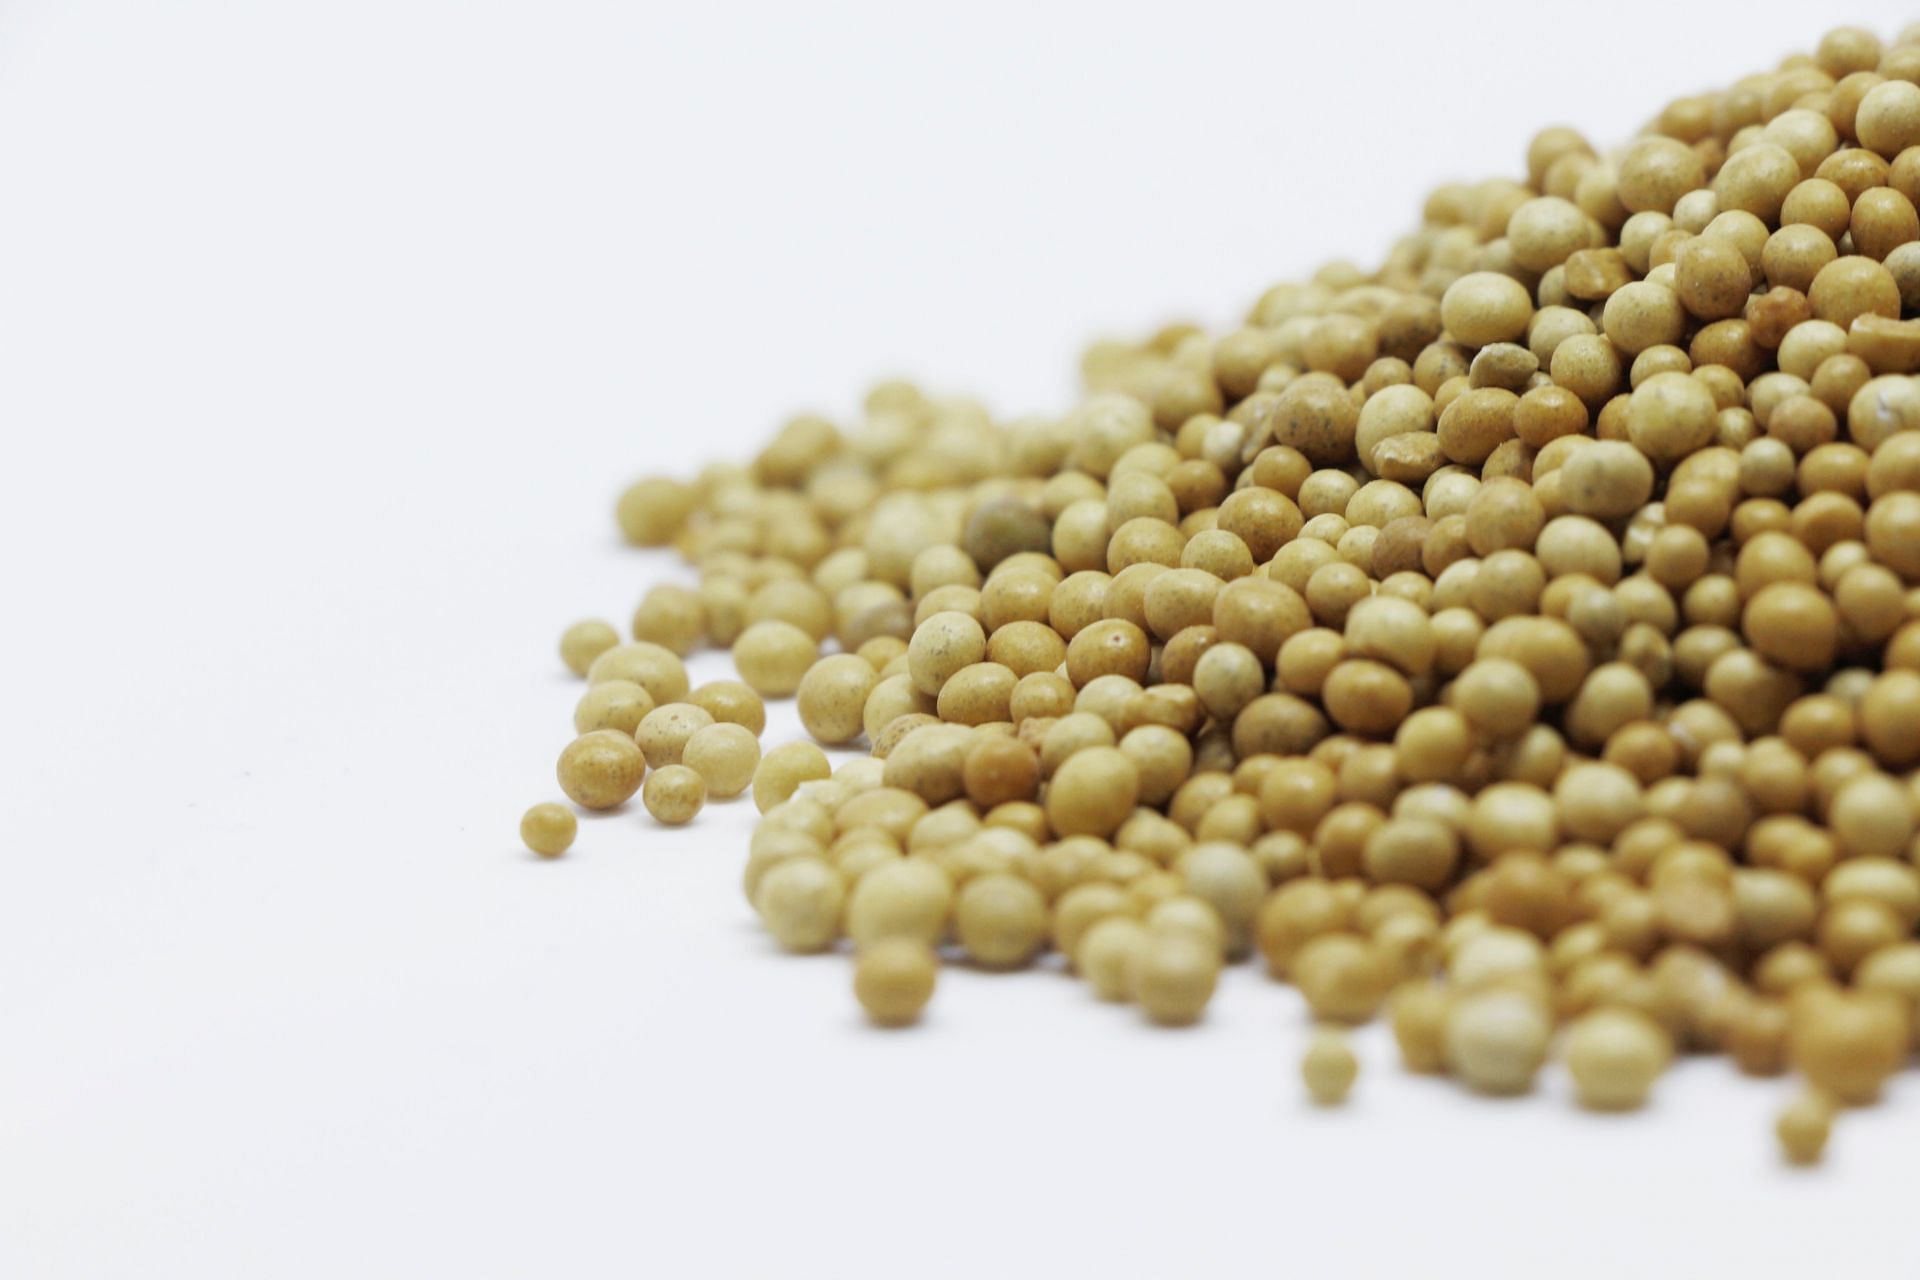 black eyed pea benefits (image sourced via Pexels / Photo by rodolpho)